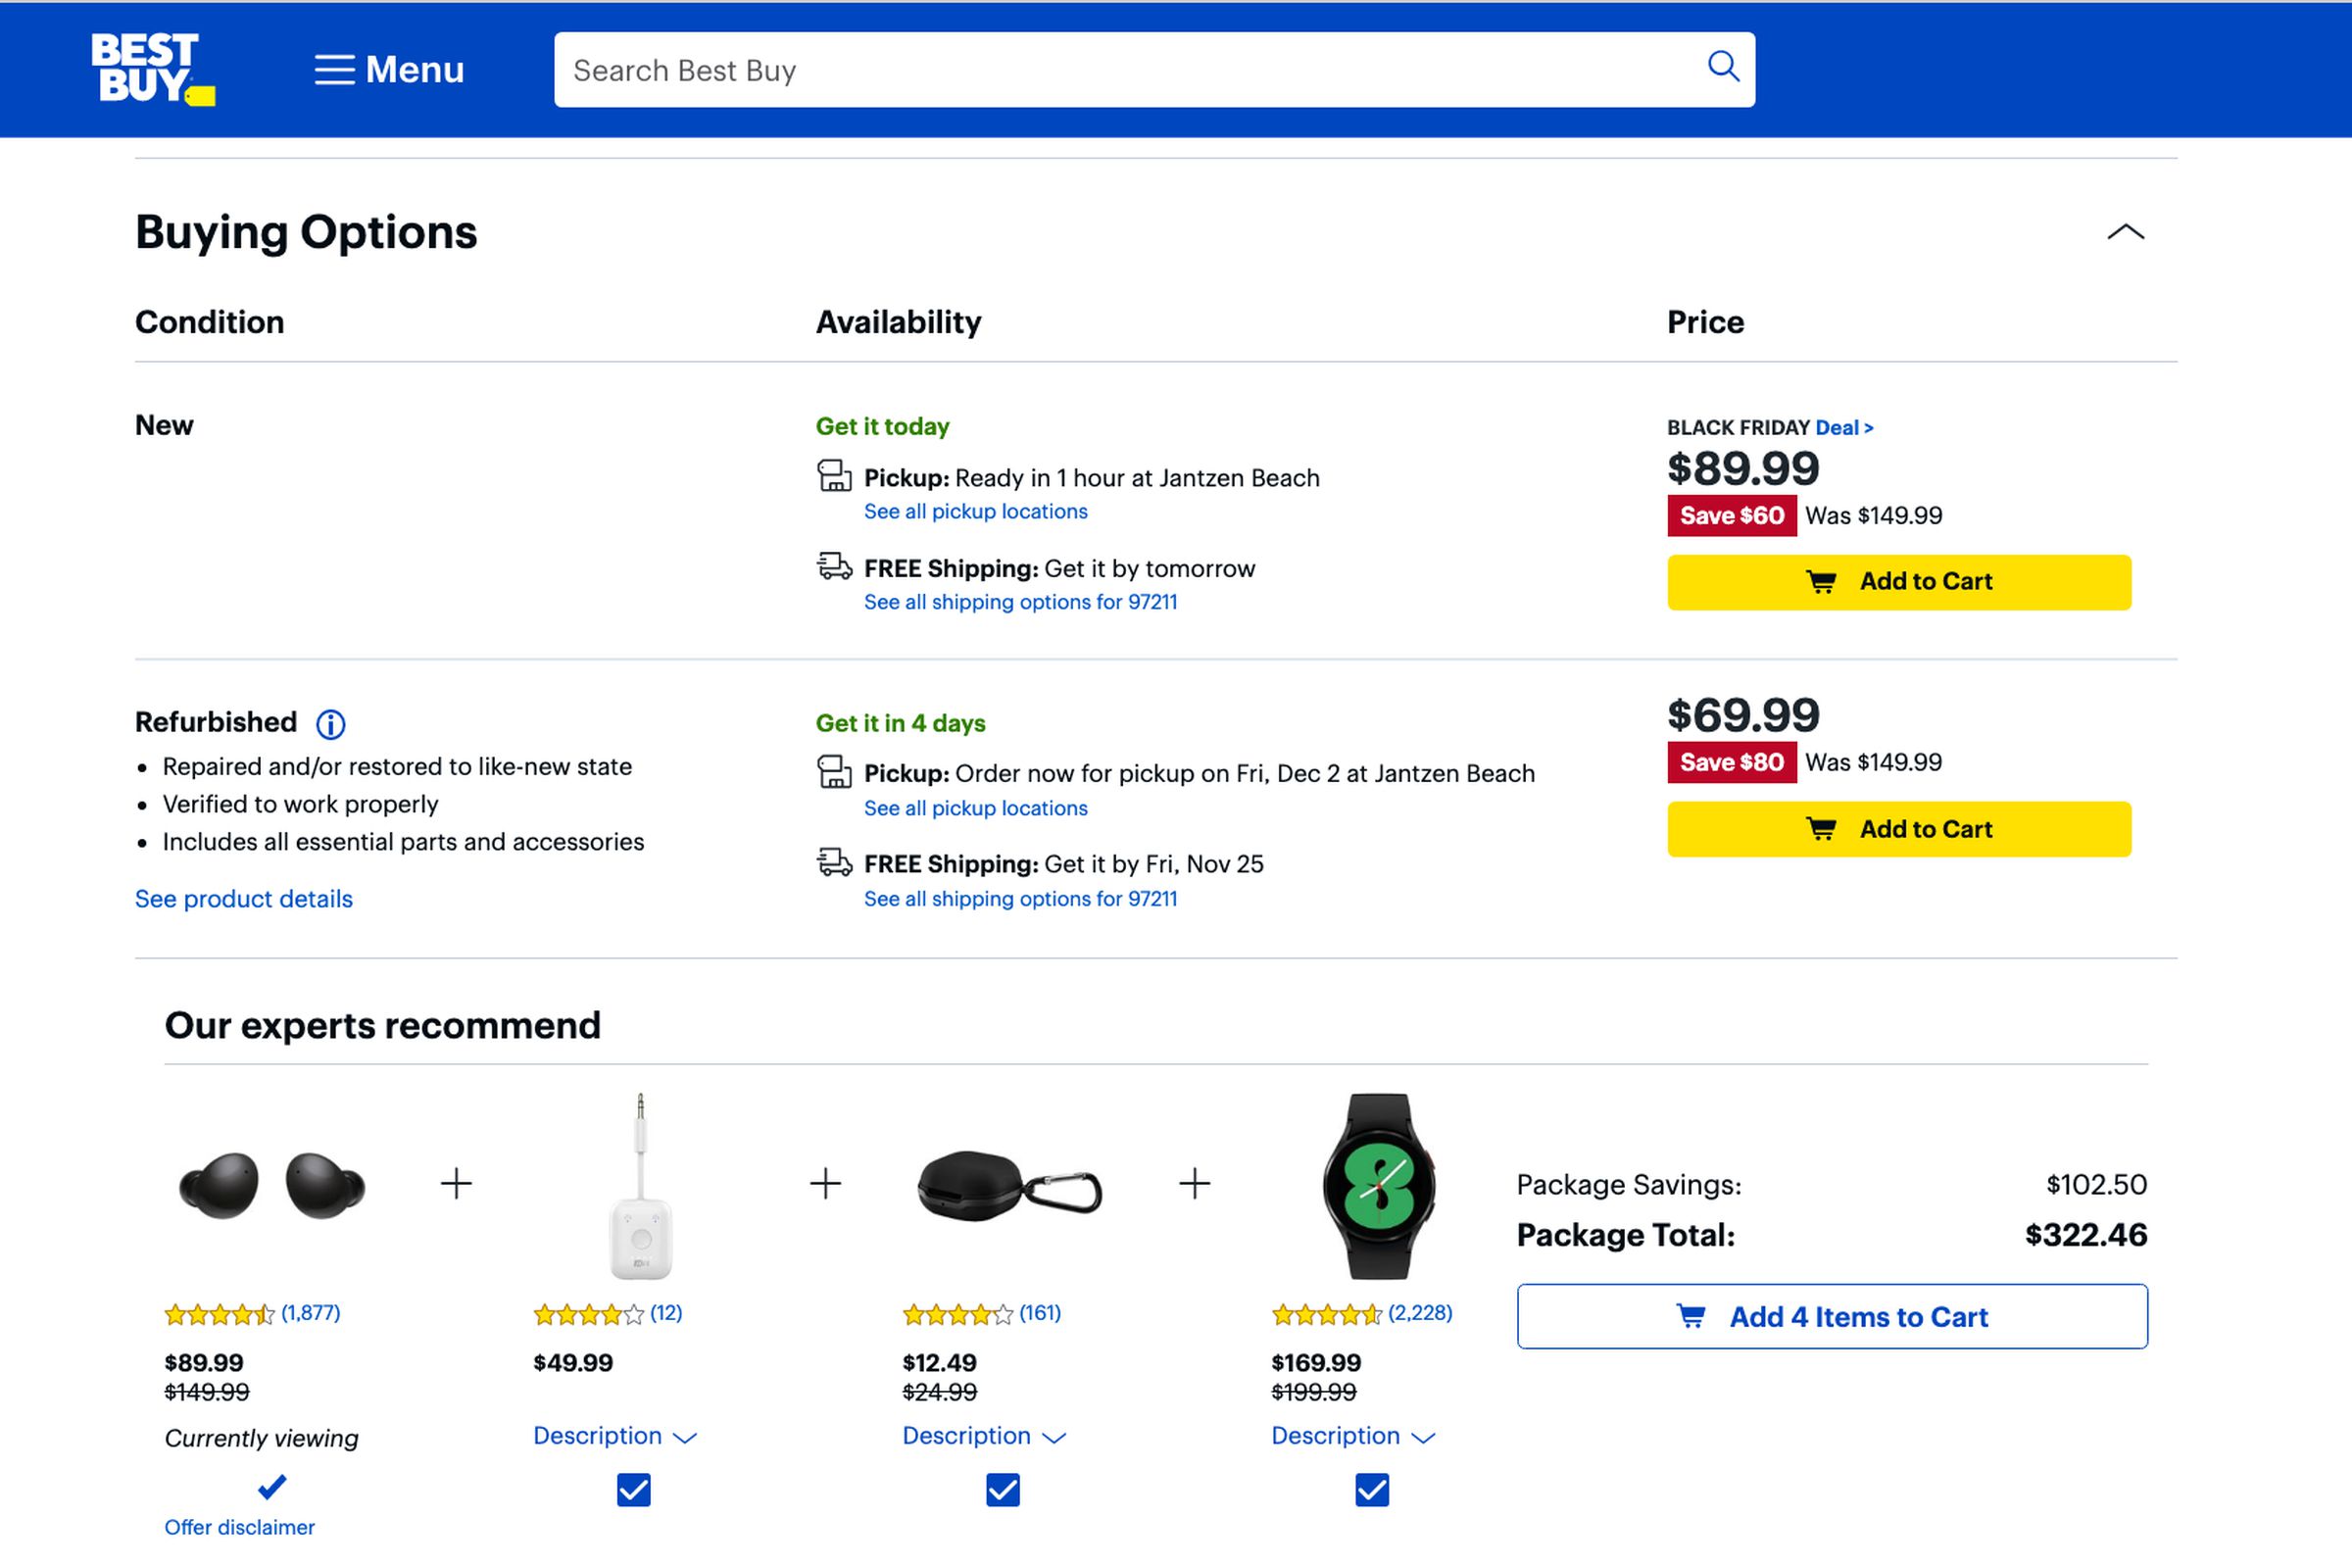 You might find refurbished or used options at Best Buy by clicking the “Buying Options” button.